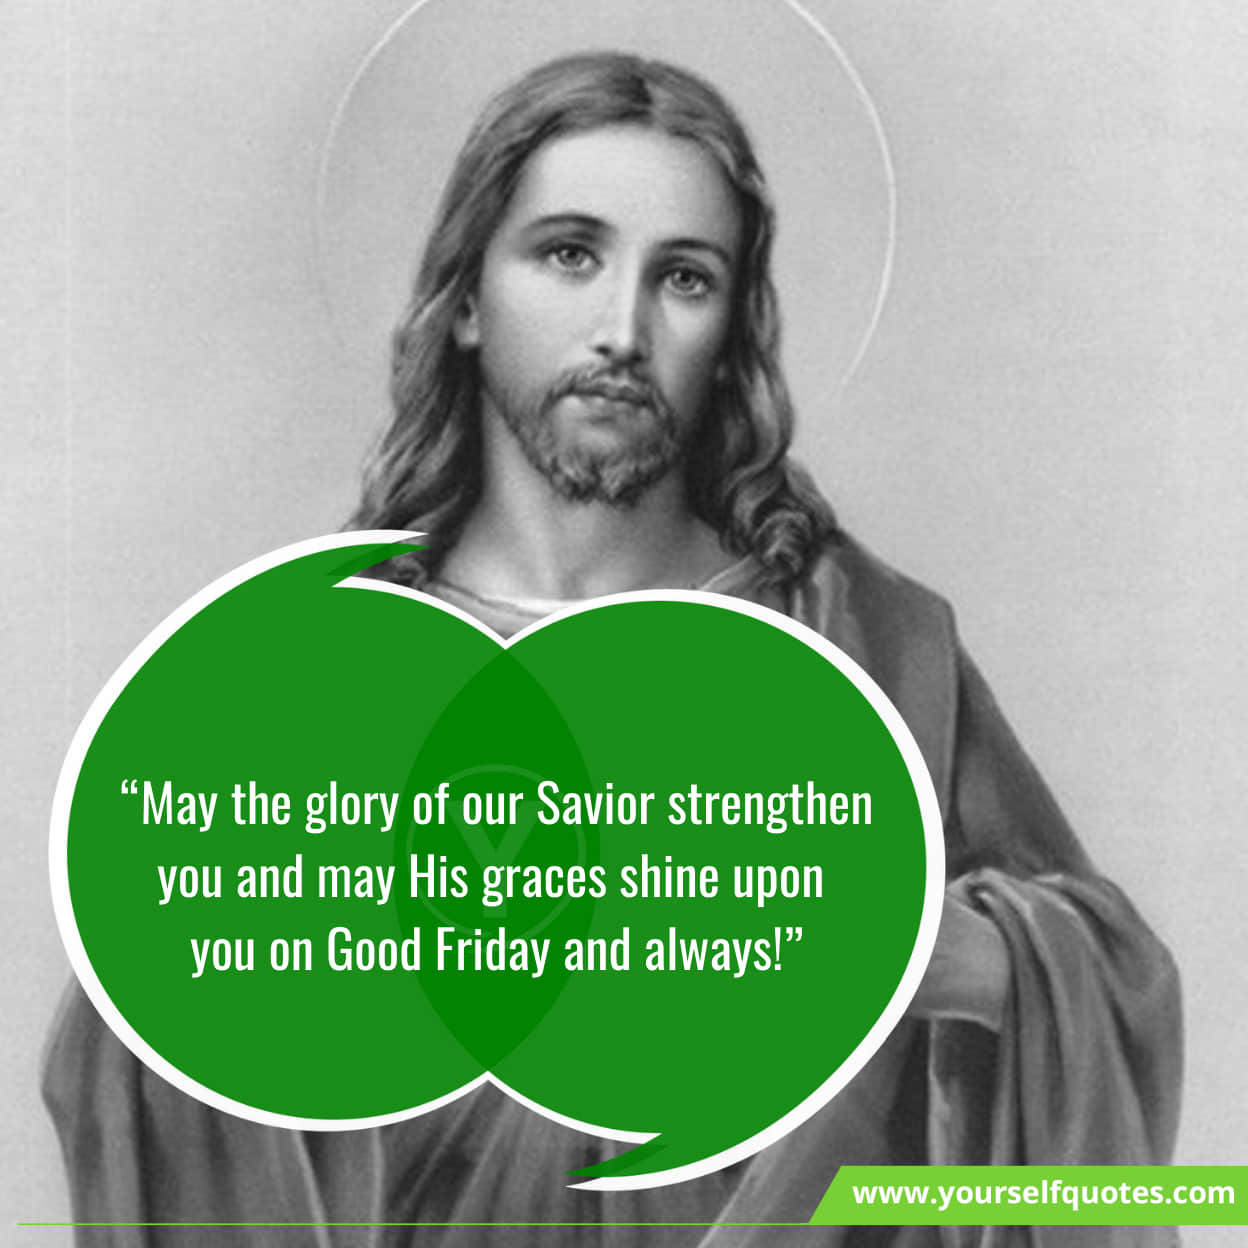 Best Good Friday Motivational Quotes